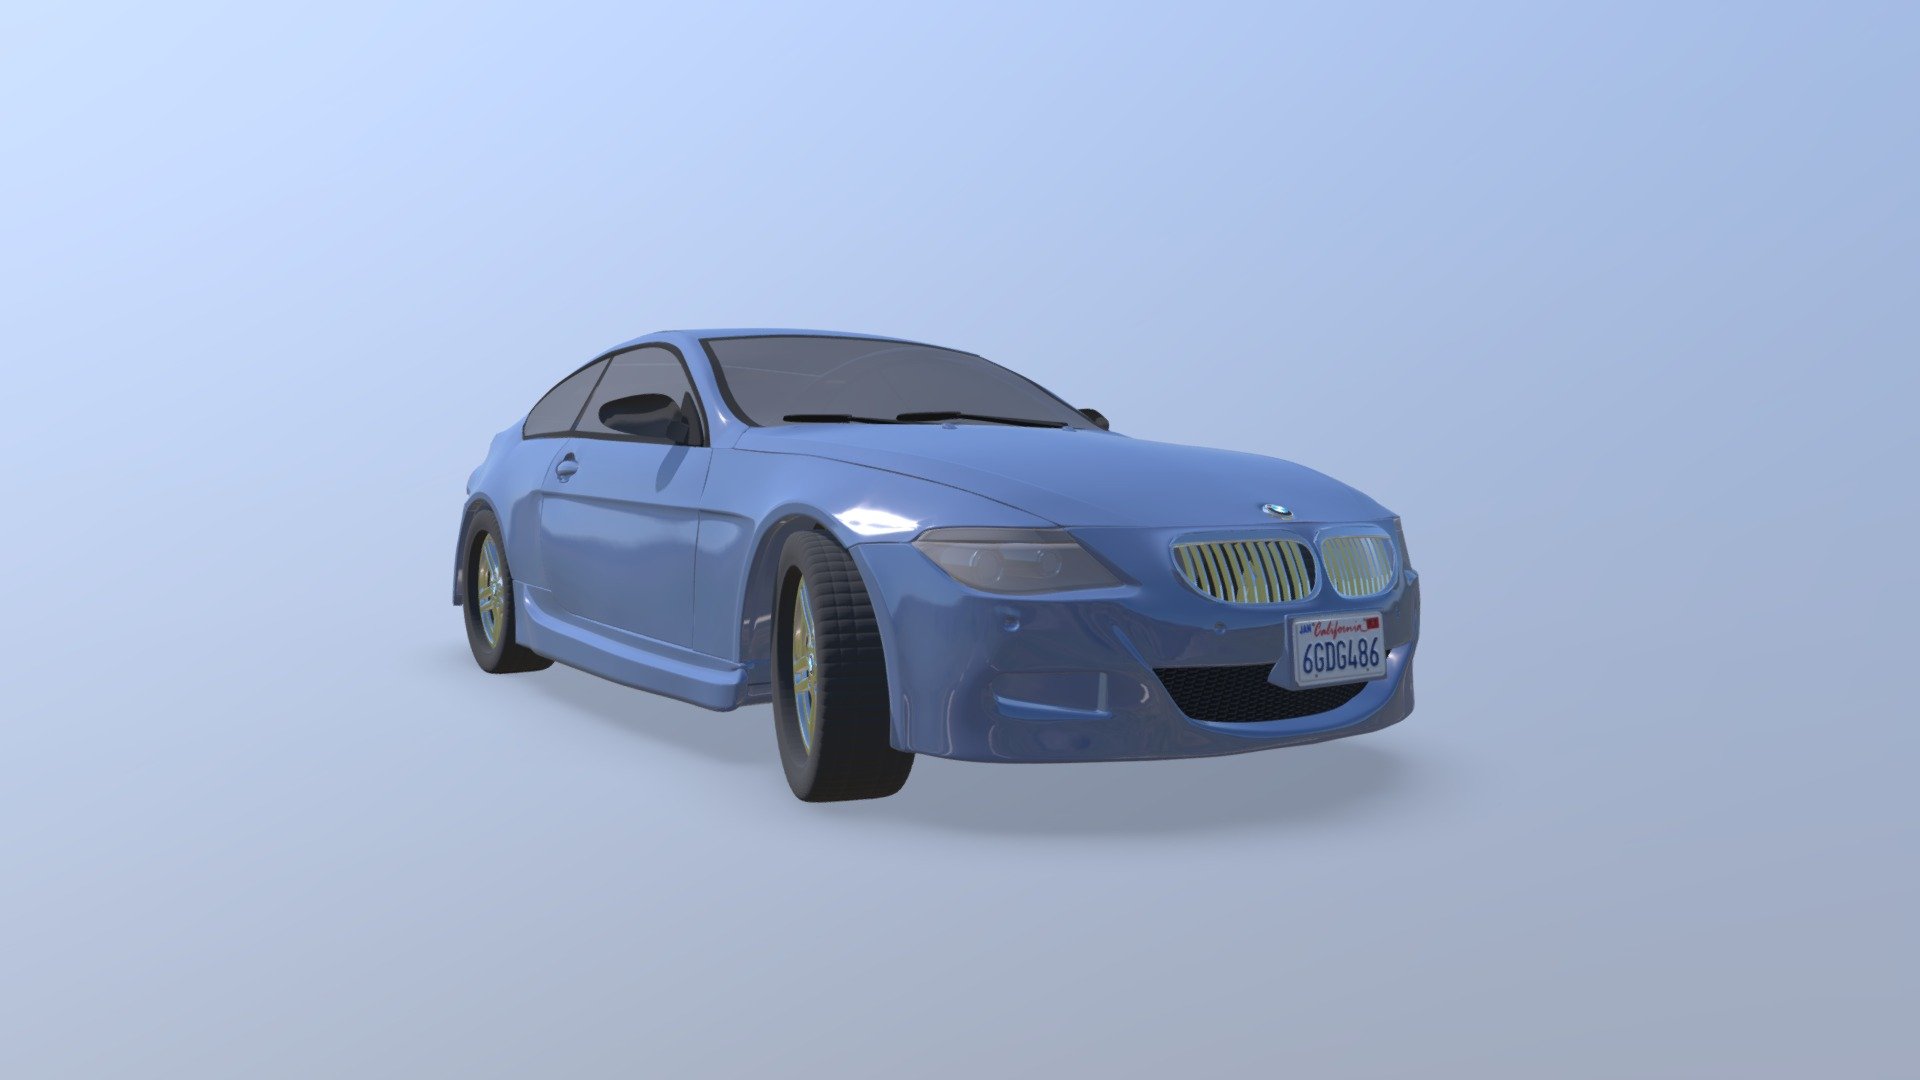 Exterior model of a 2006 BMW M6 - 2006 BMW M6 Coupe - 3D model by JosephJacobs 3d model